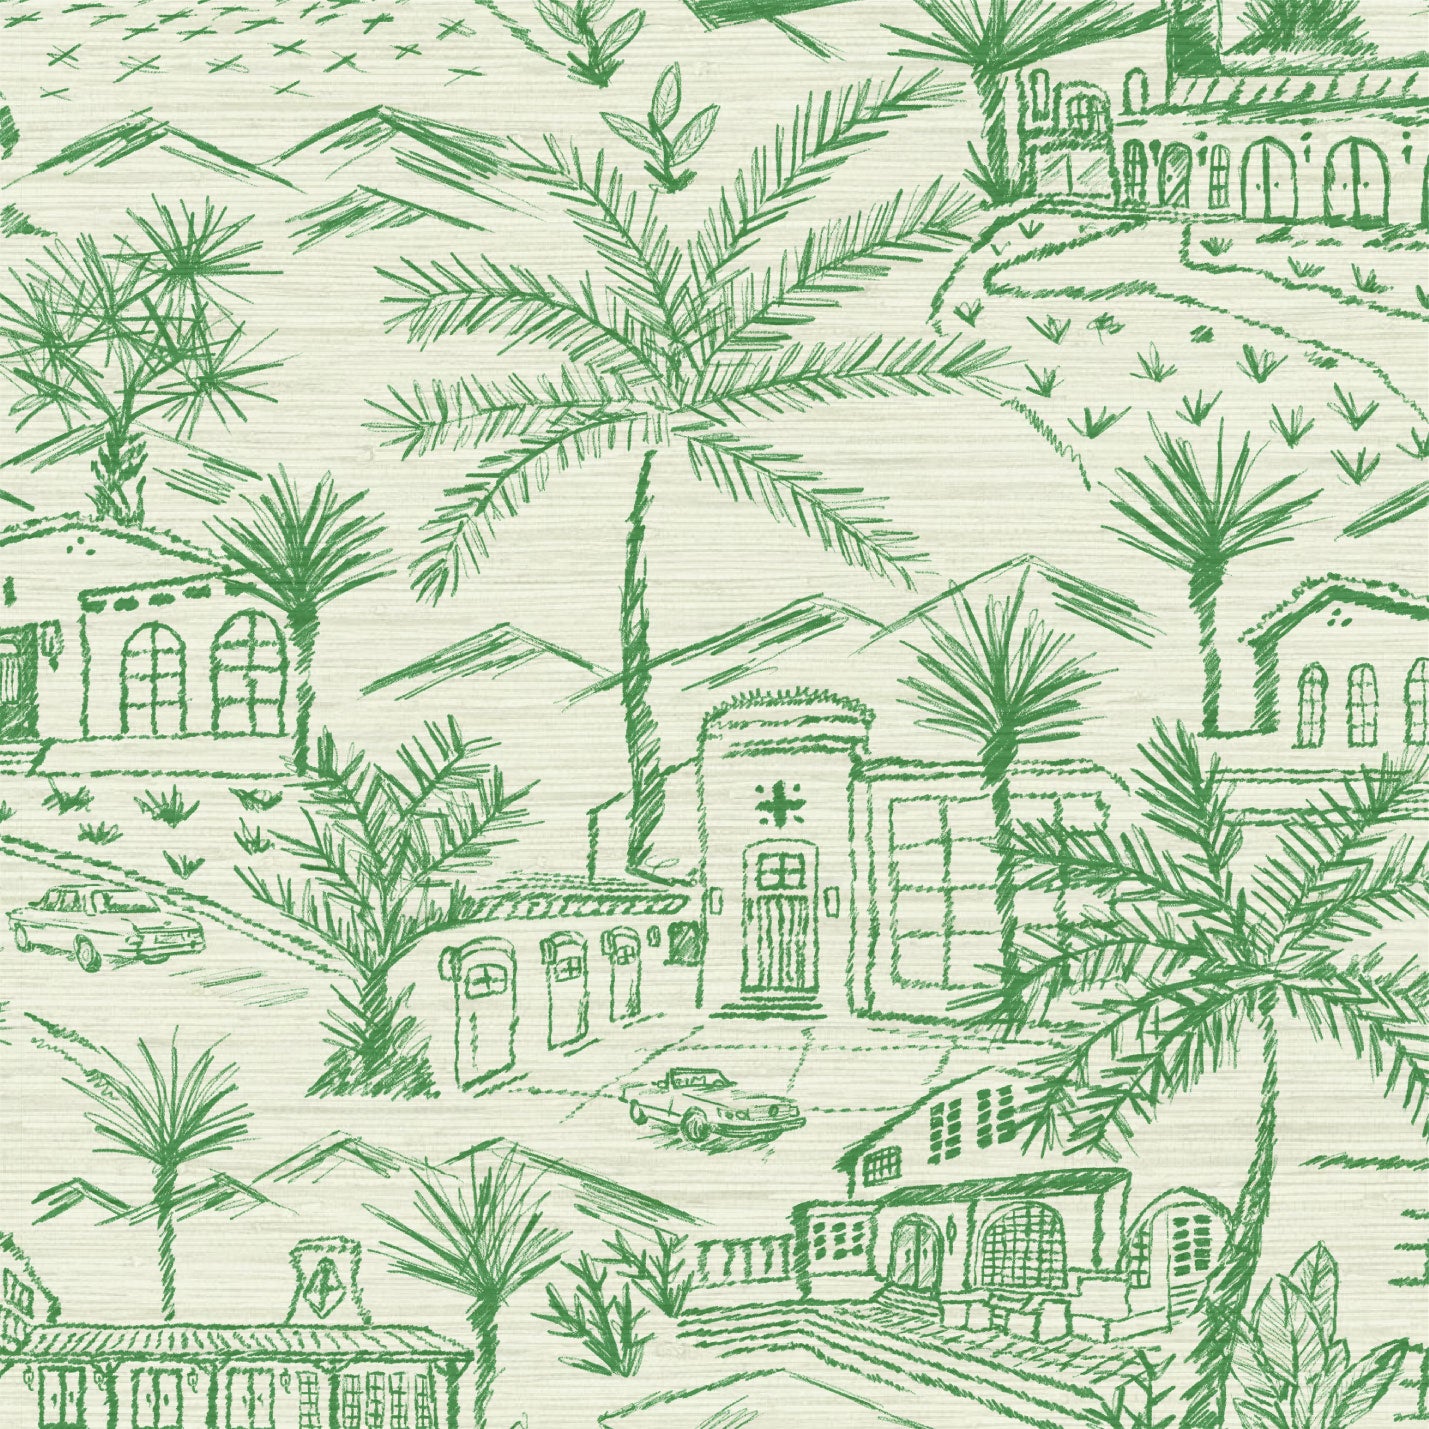 Grasscloth wallpaper Natural Textured Eco-Friendly Non-toxic High-quality  Sustainable Interior Design Bold Custom Tailor-made Retro chic Bold tropical garden palm tree vintage coastal toile Grasscloth wallpaper Natural Textured Eco-Friendly Non-toxic High-quality  Sustainable Interior Design Bold Custom Tailor-made Retro chic Bold Toile de Jouy green mint off-white white 